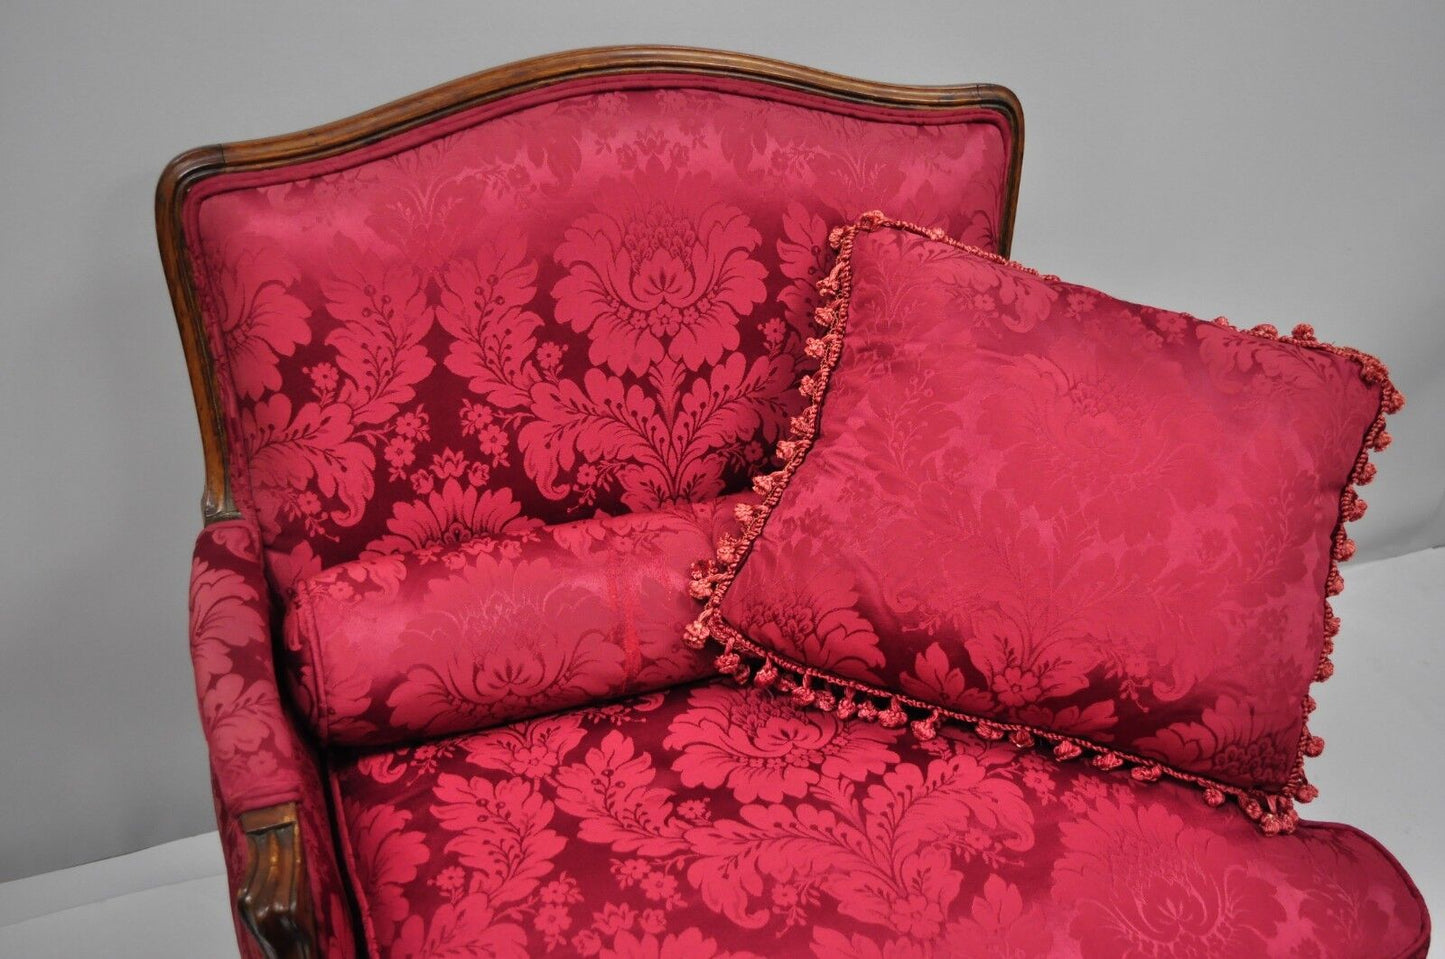 Antique French Country Louis XV Style Walnut Burgundy Small Wingback Settee